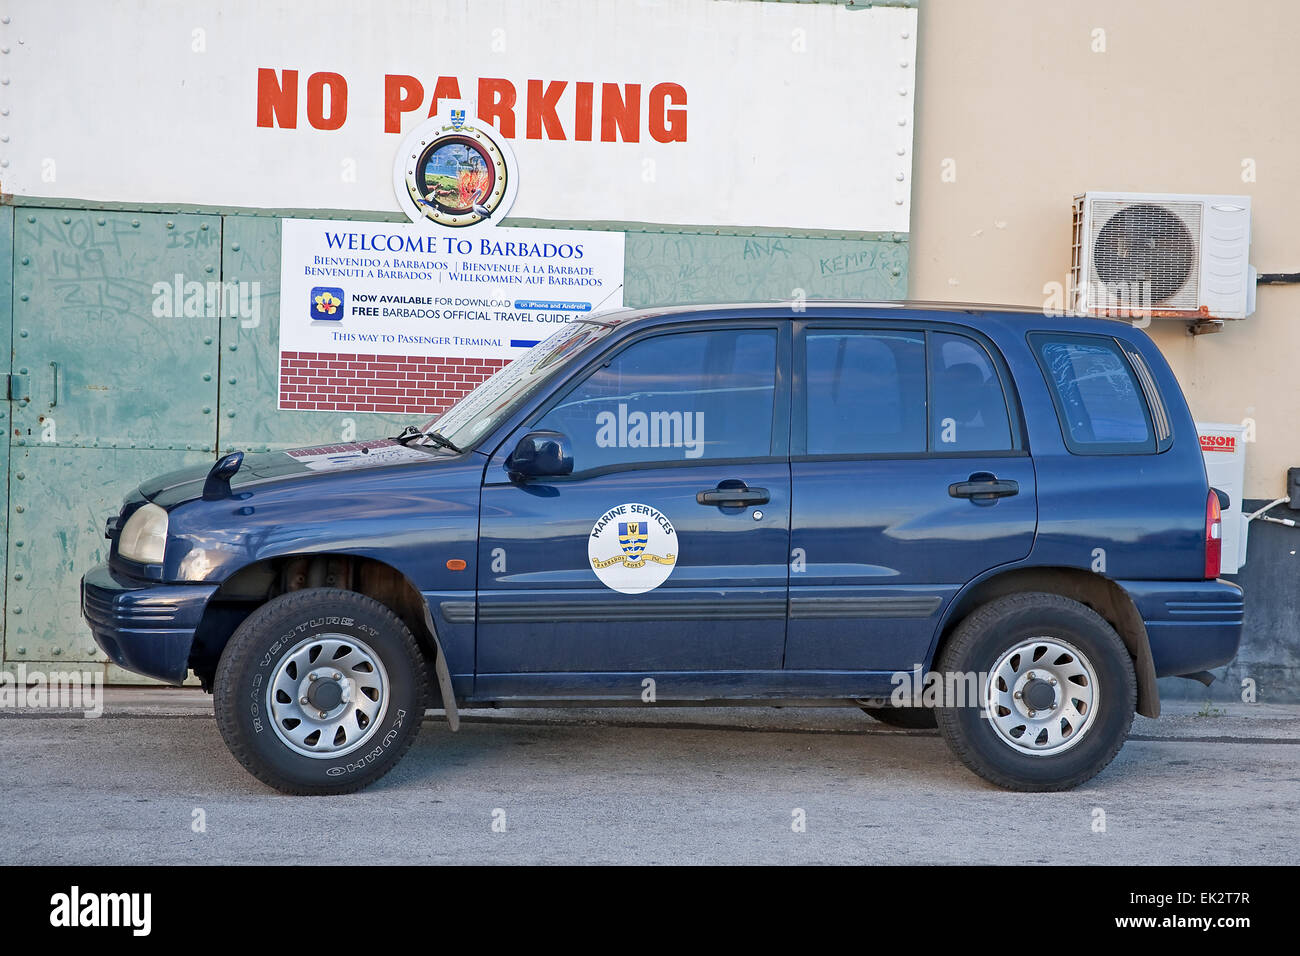 Port Authority car in Barbados parked in front of a no parking sign Stock Photo